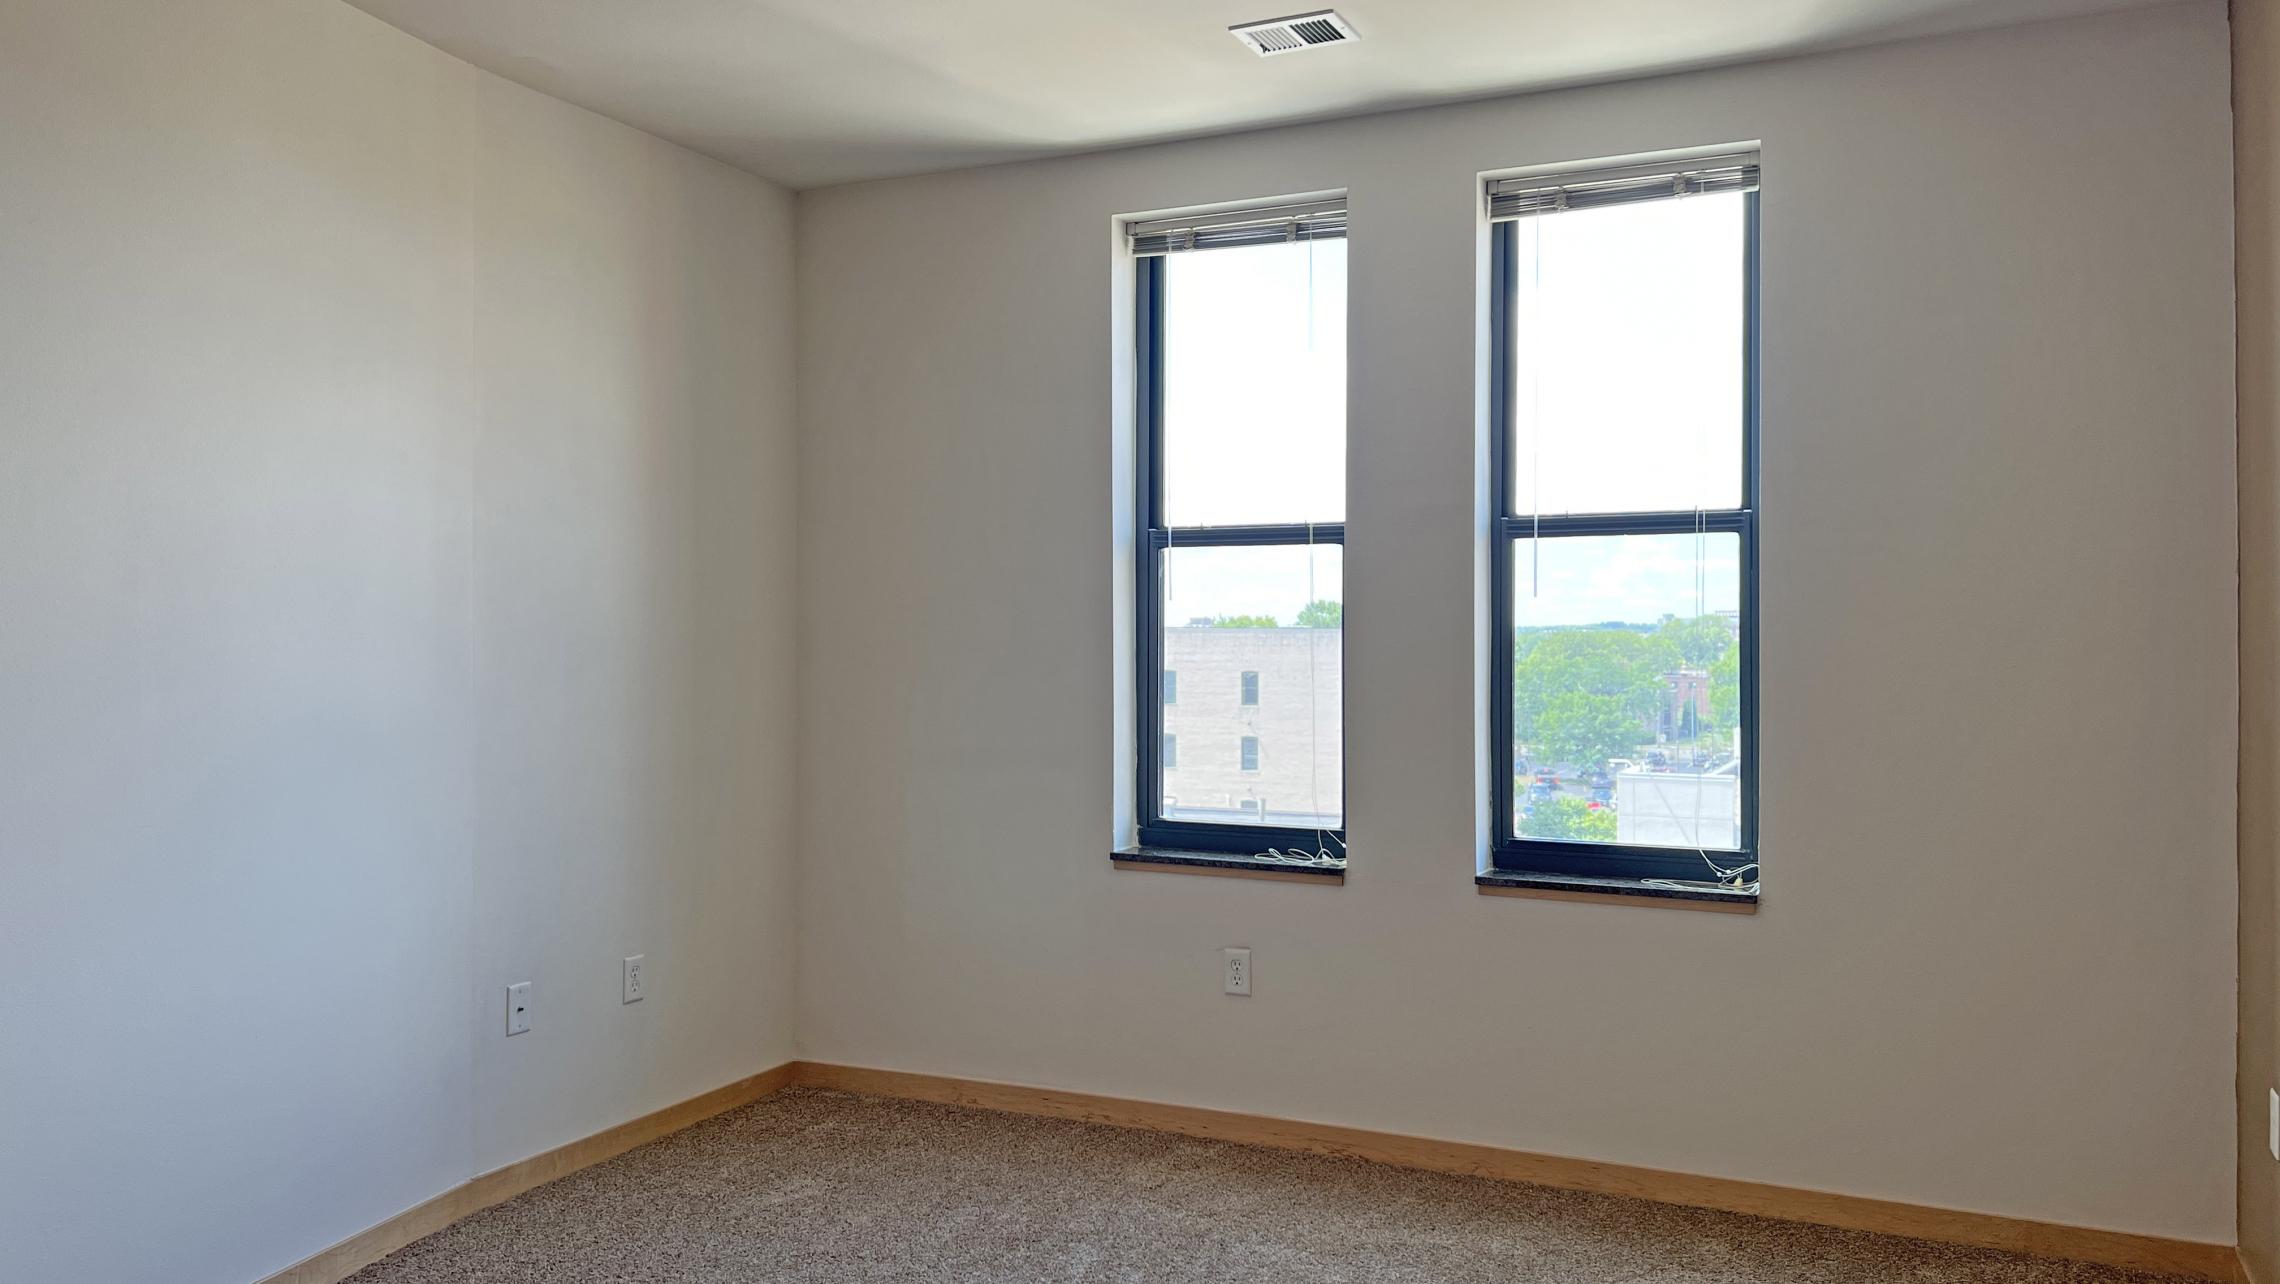 The-Depot-Apartment-1-512-One-Bedroom-Downtown-Madison-Capitol-View-Balcony-Lake-Cats-Fintess-Terrace-City-Living-Kithcen-Bathroom-Upscale